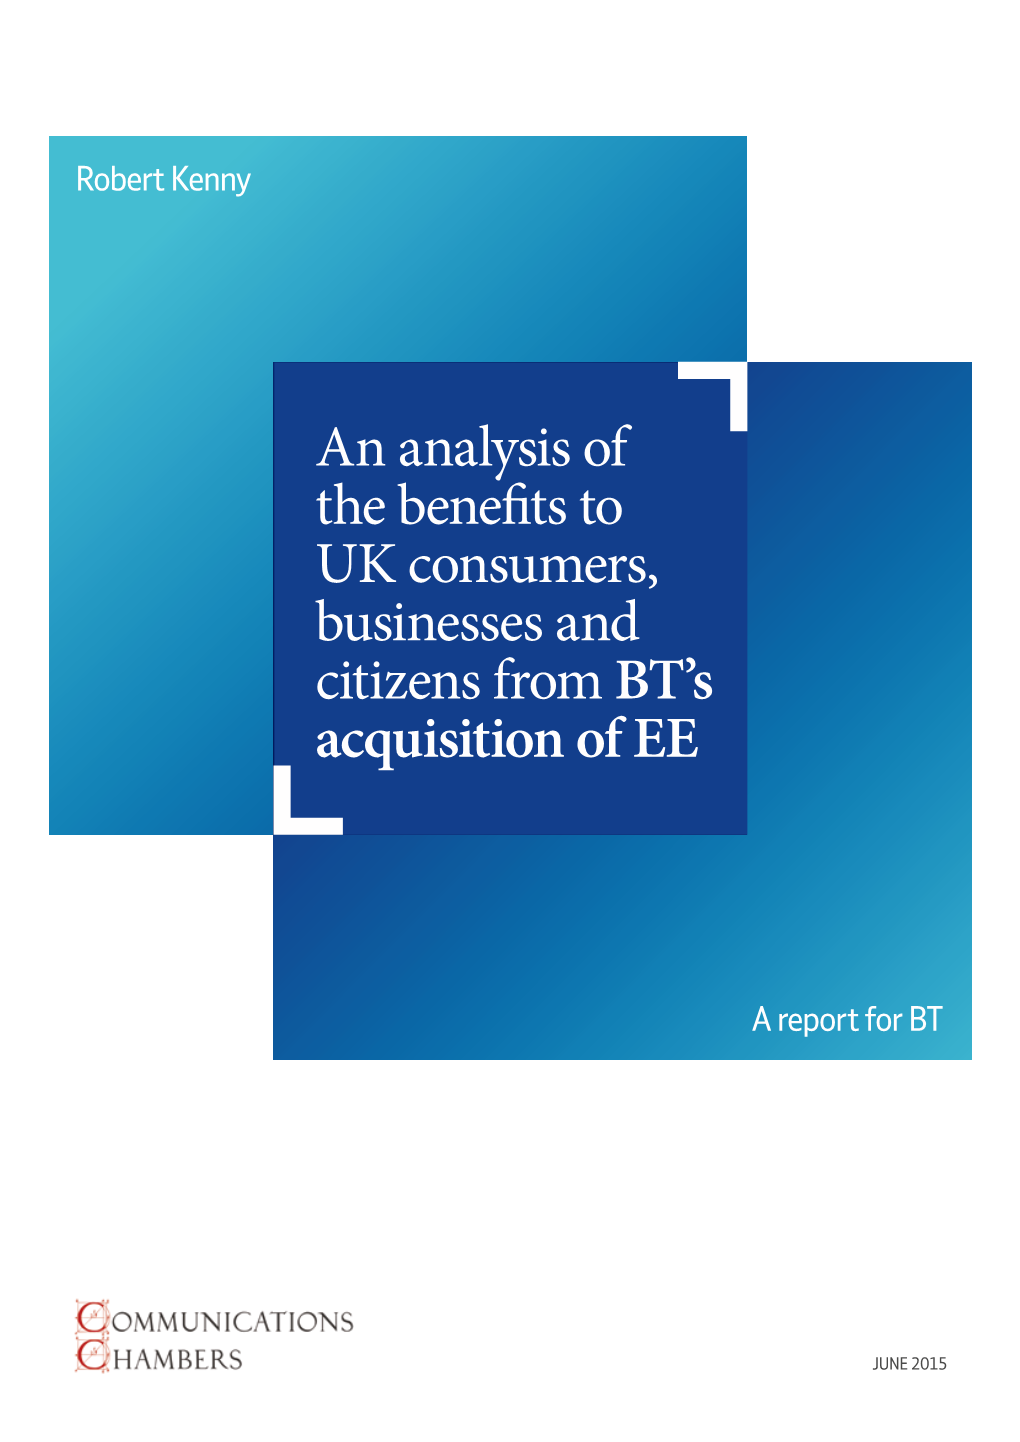 An Analysis of the Benefits to UK Consumers, Businesses and Citizens from BT’S Acquisition of EE